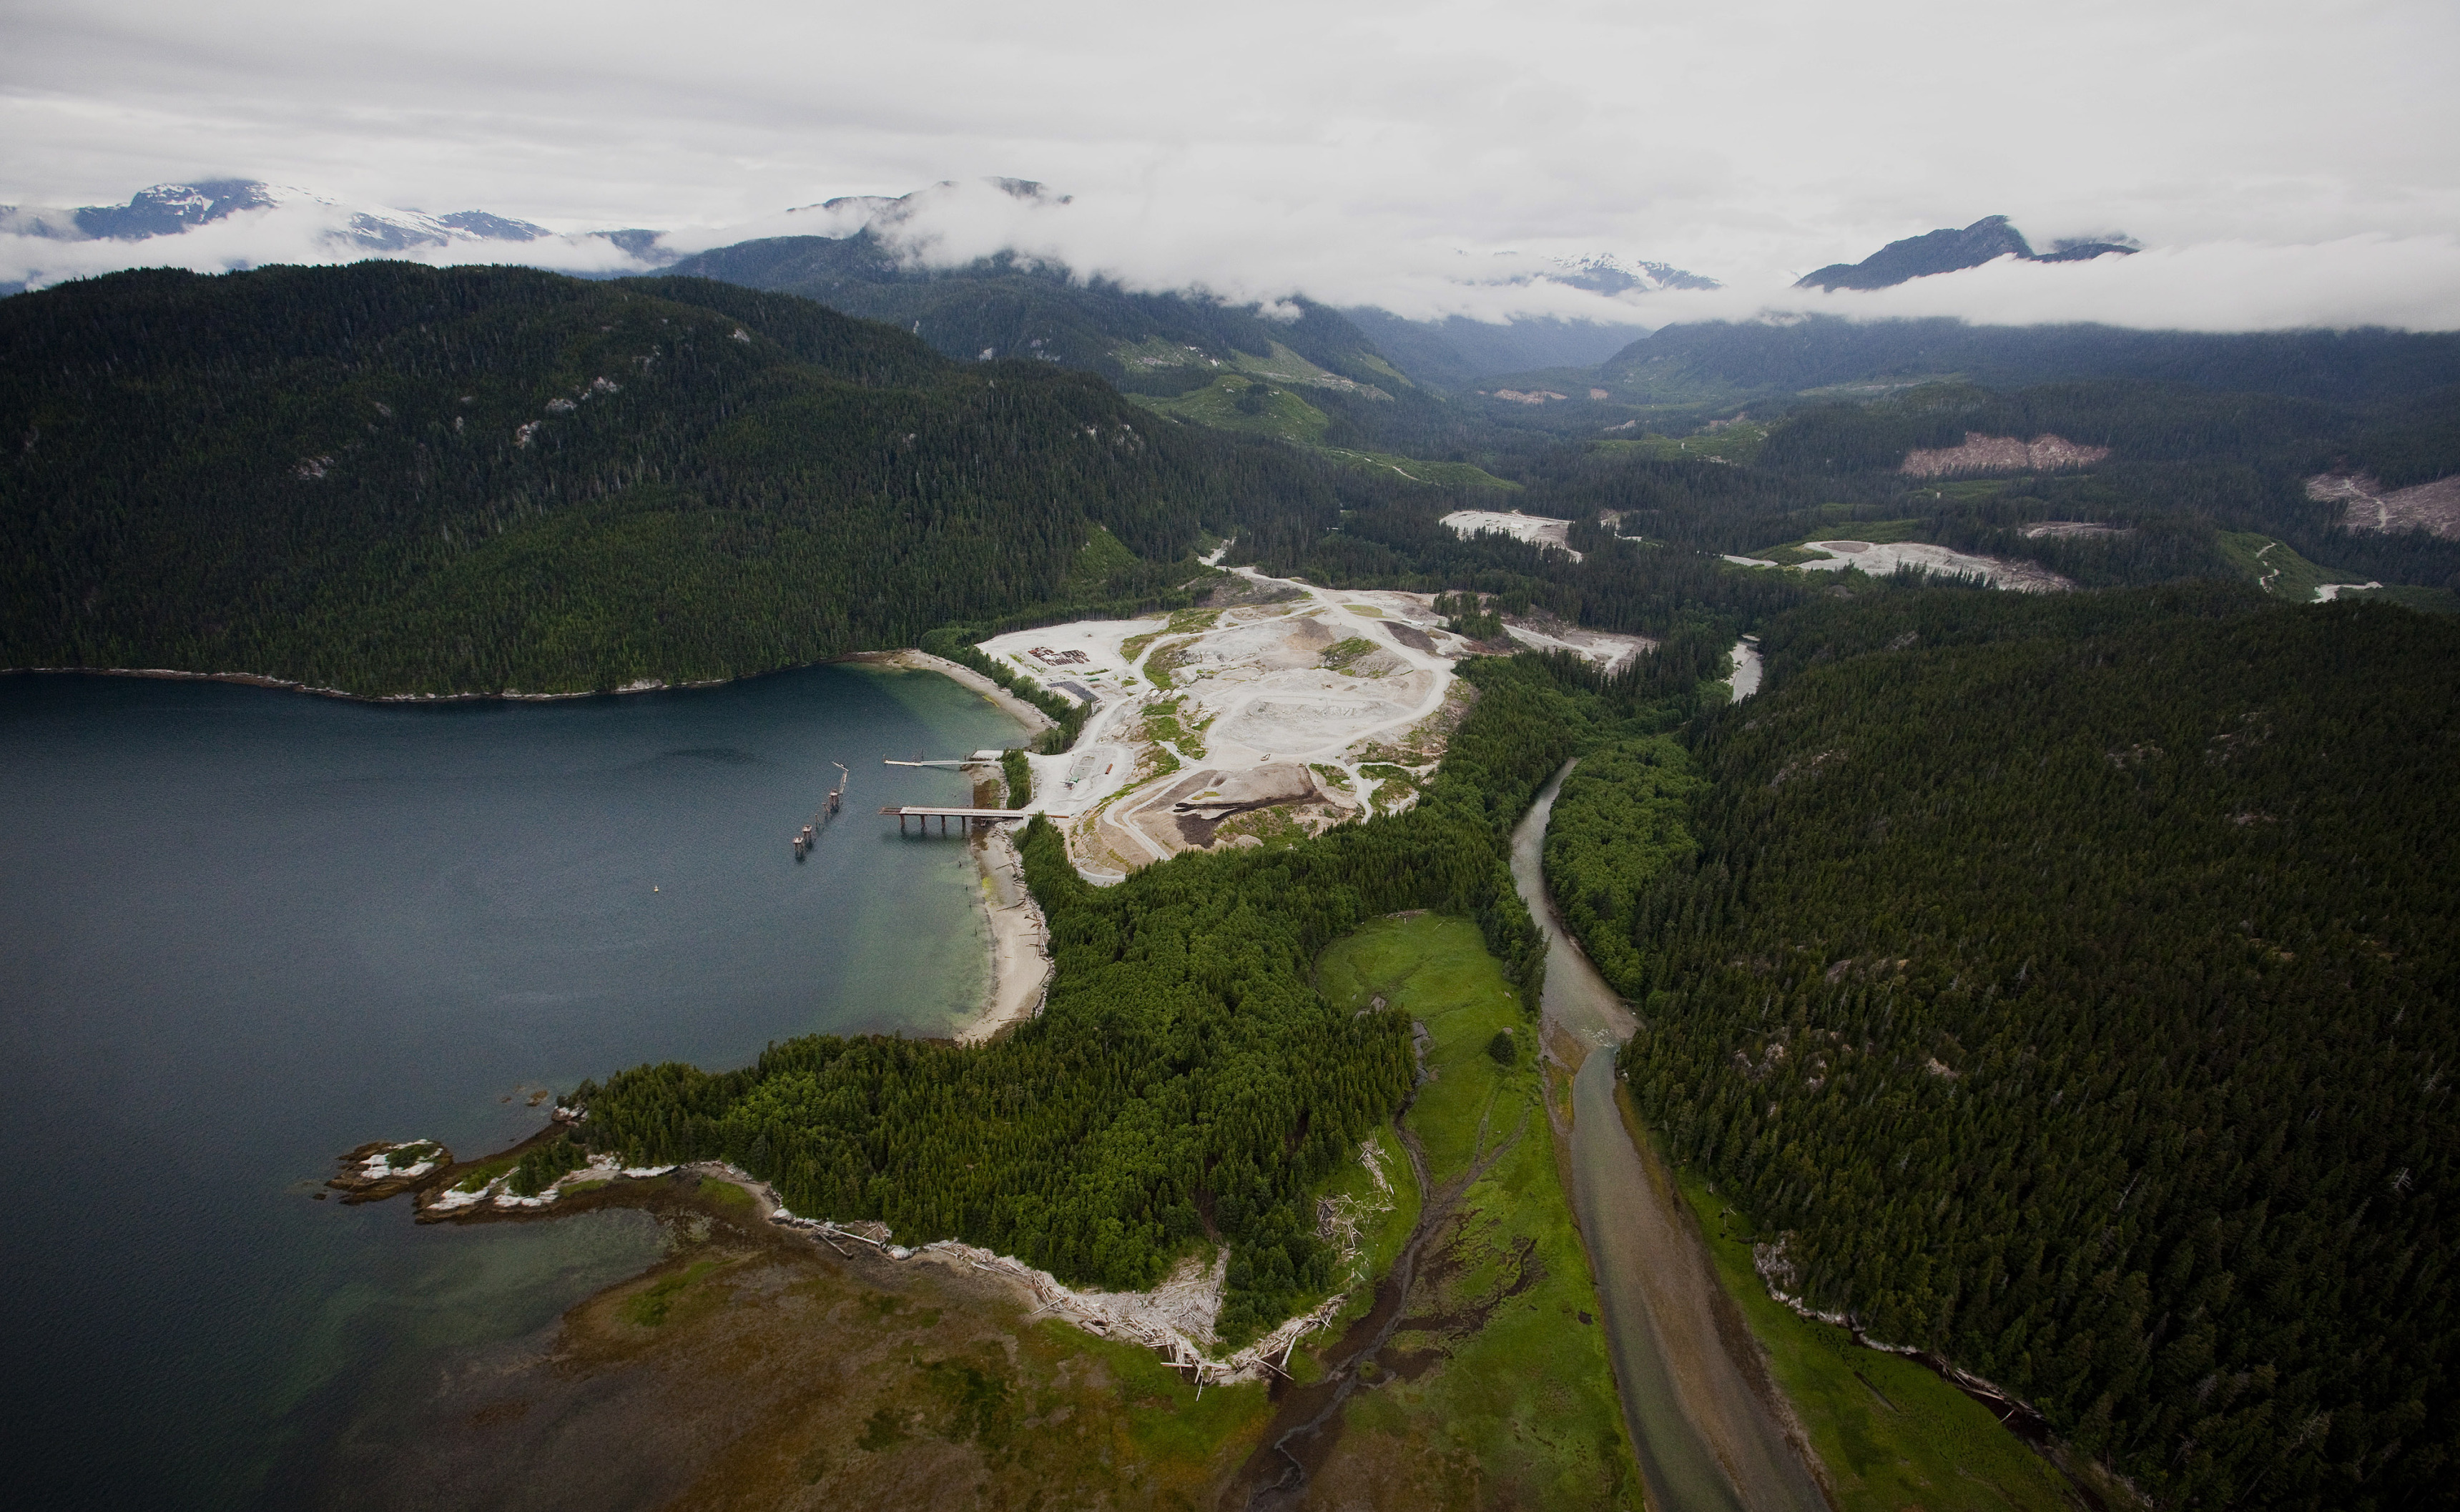 The Chevron and Woodside LNG site on the Douglas Channel, near Kitimat, British Columbia.